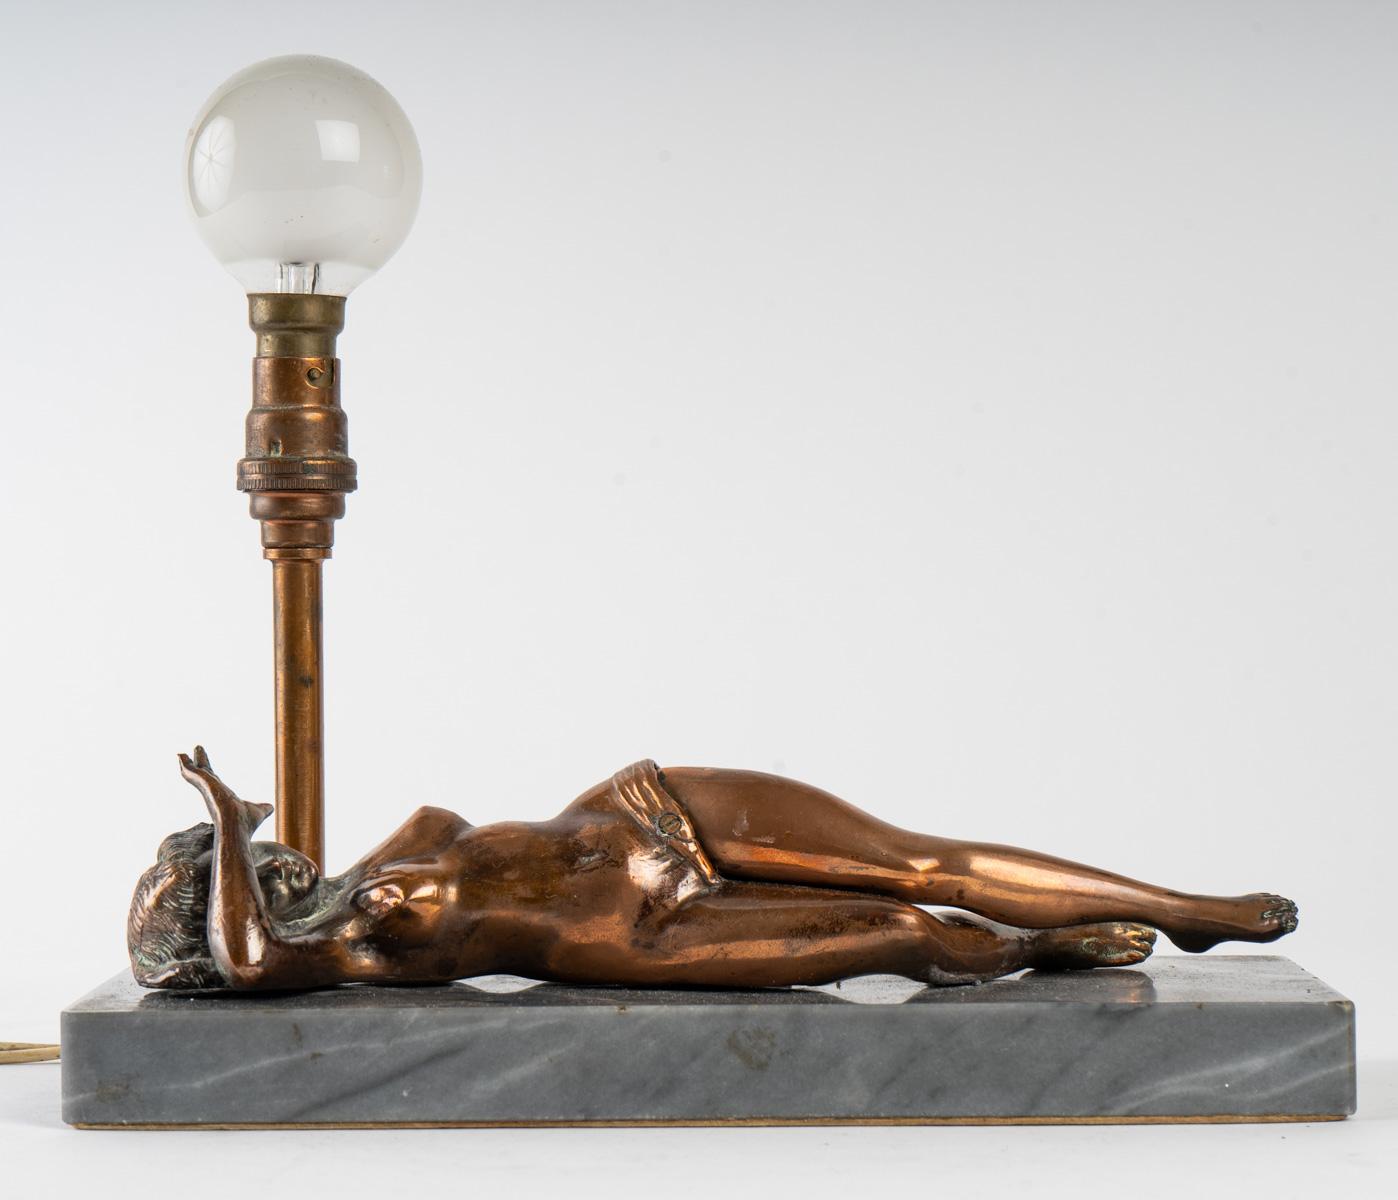 Nightlight, cigar cutter table Lamp depicting a young woman with her left leg rising to cut a cigar, bronze and marble, early 20th century, 1920.
Measures: H 20 cm, W 22 cm, D 9 cm.